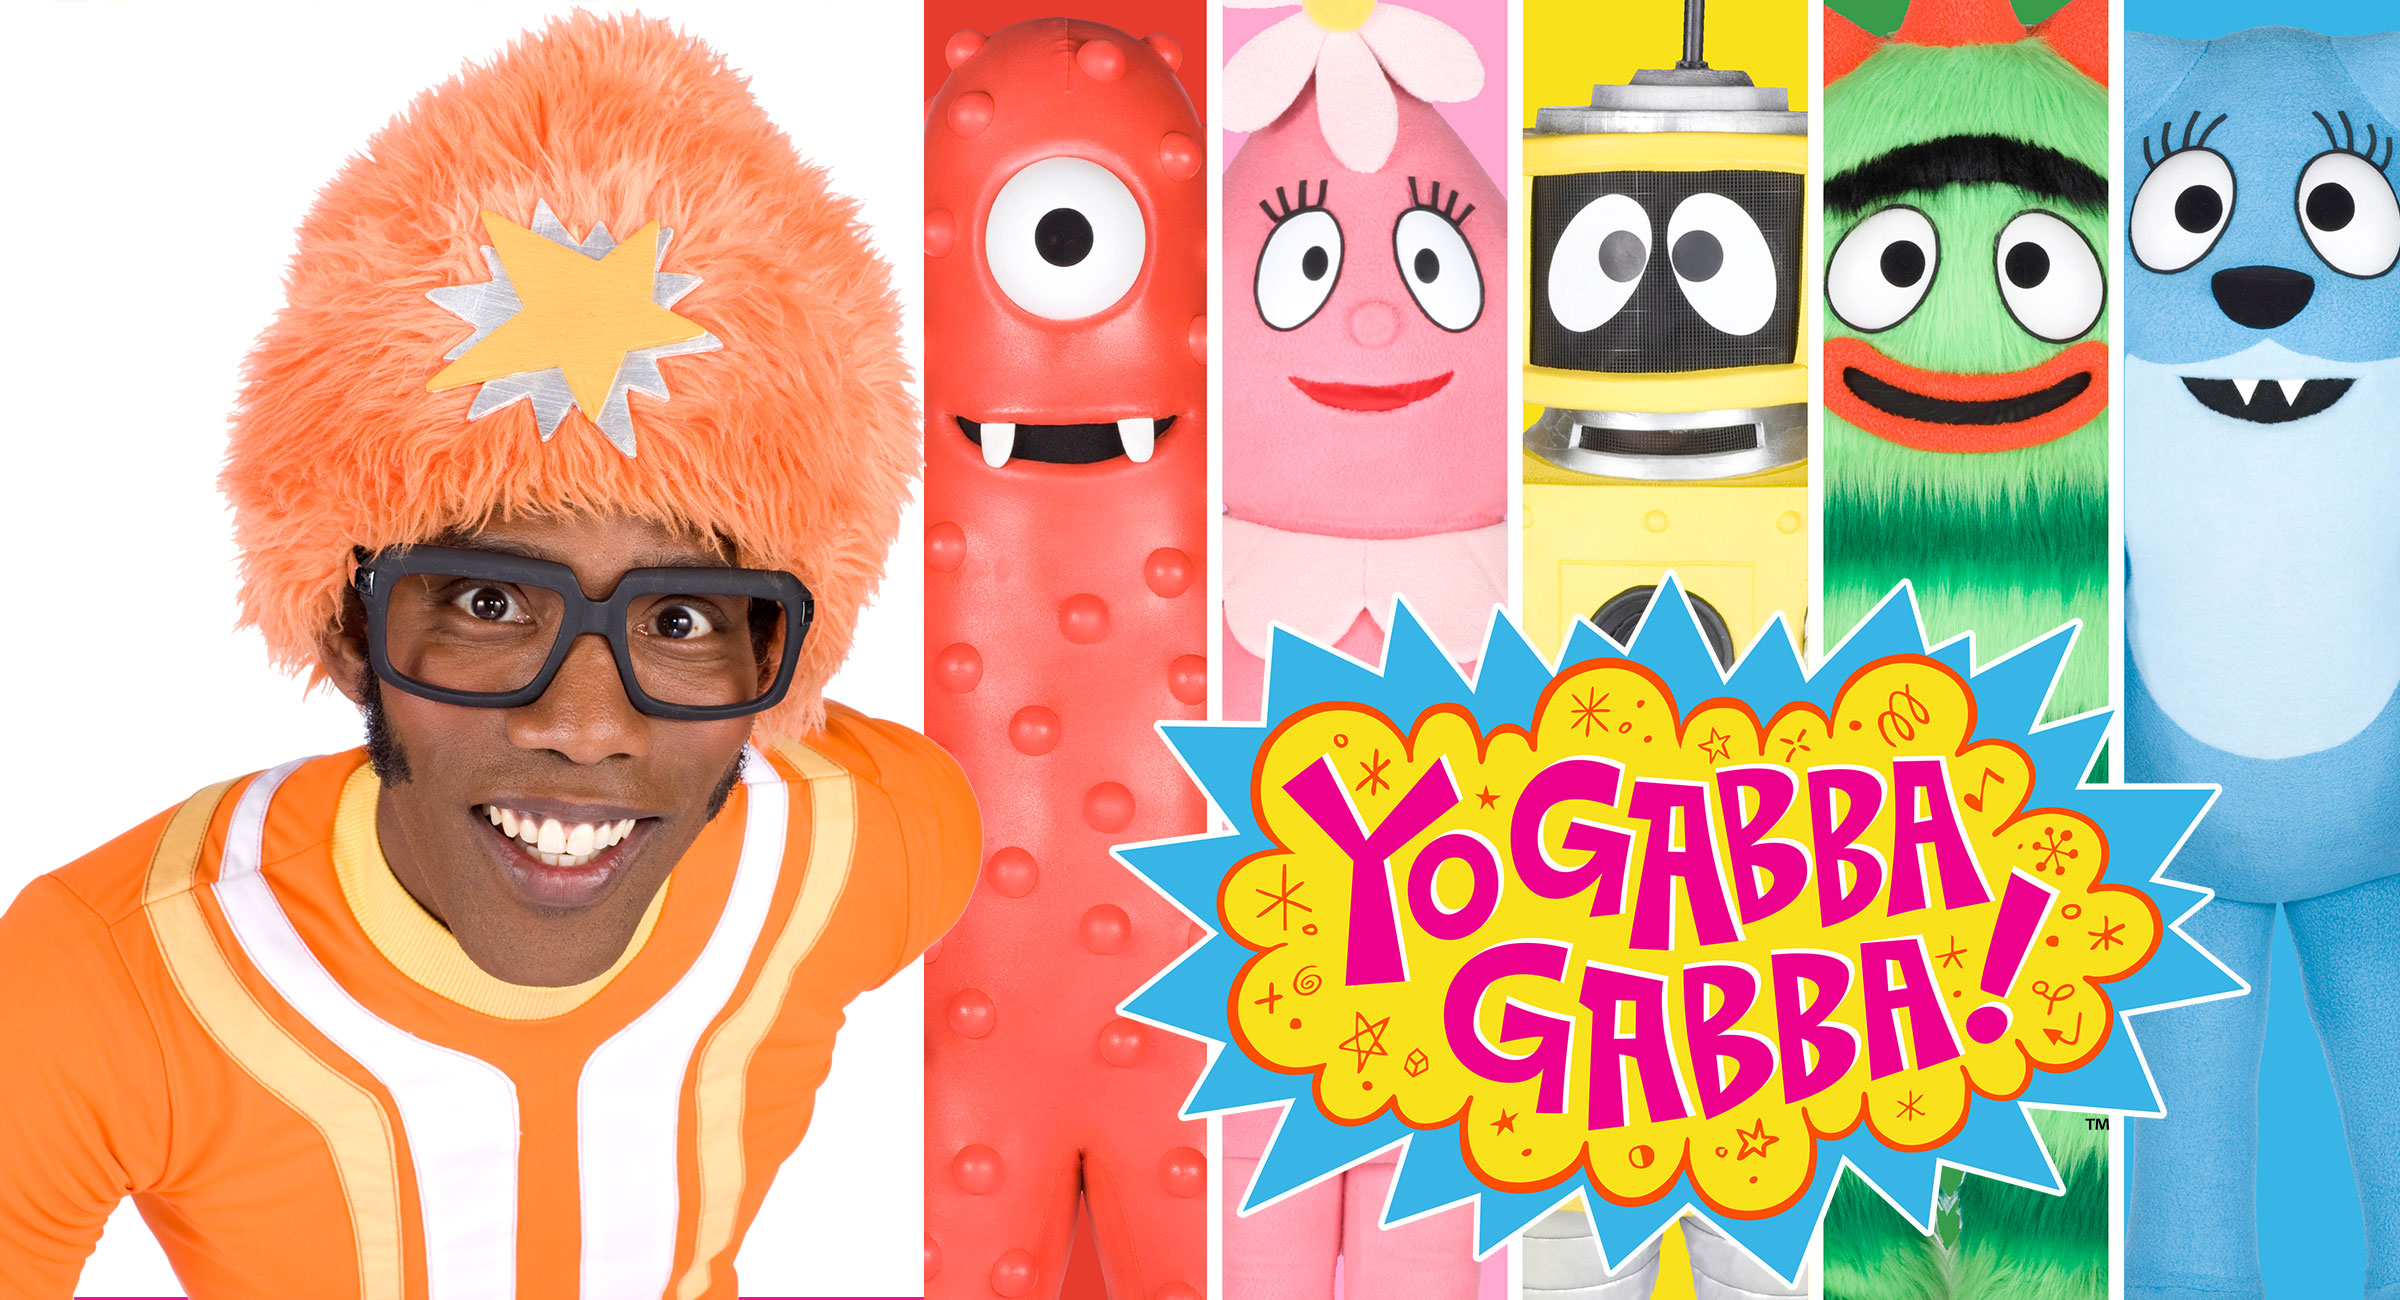 https://static.wikia.nocookie.net/variety-of-characters/images/3/31/Yo_Gabba_Gabba_Thumbnail_with_the_Gabba_Gang.jpg/revision/latest?cb=20230101070810